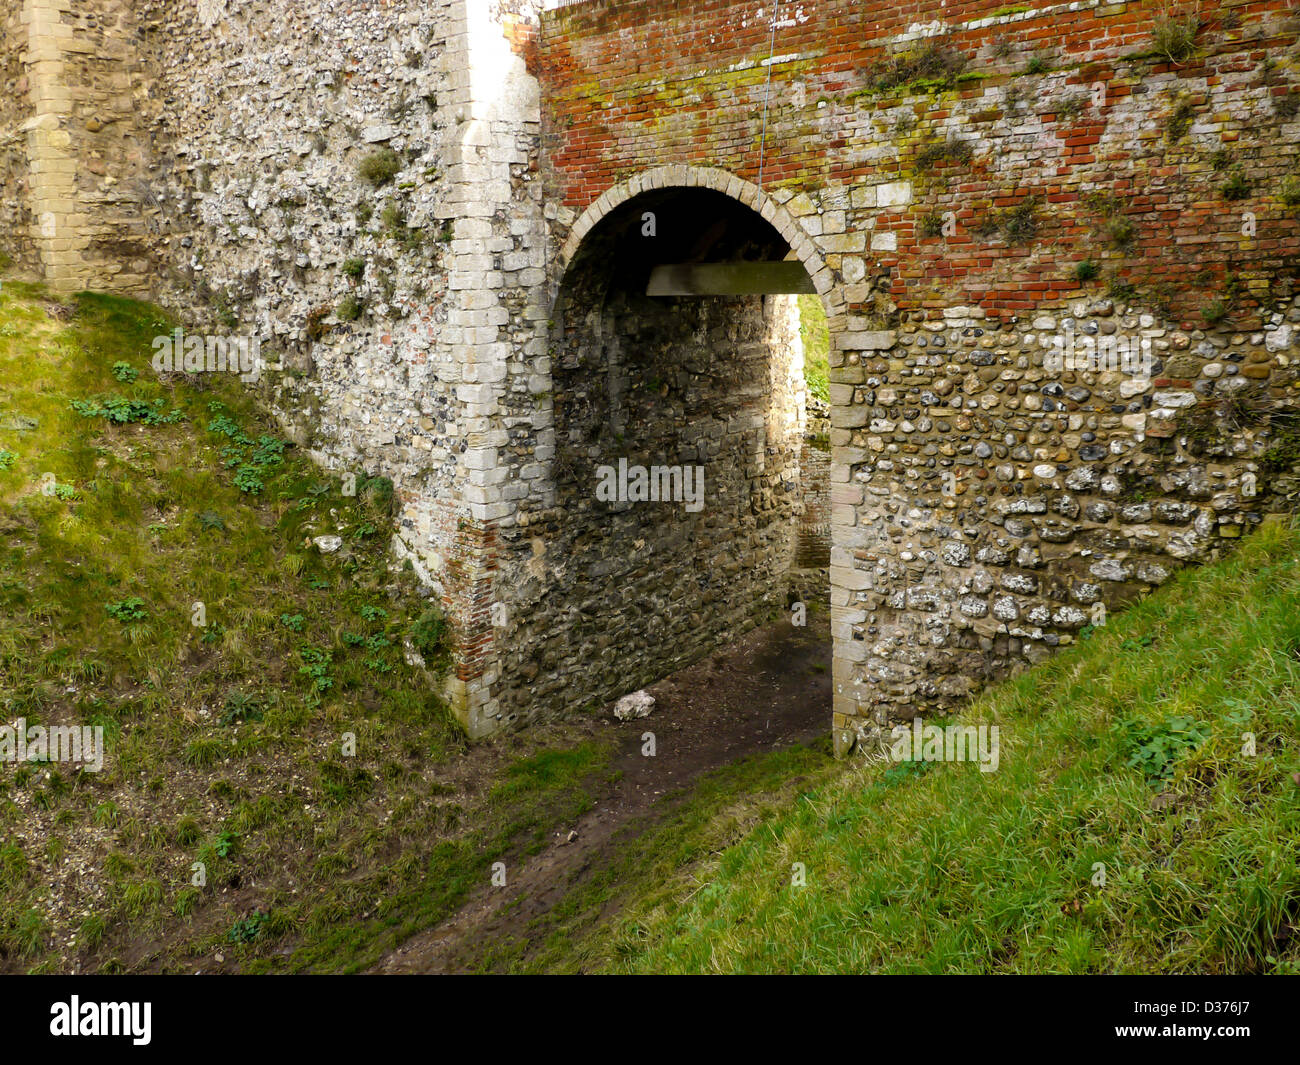 An archway through early mote and bailey or ring work of Framlingham castle, Suffolk, UK Norman castle Stock Photo